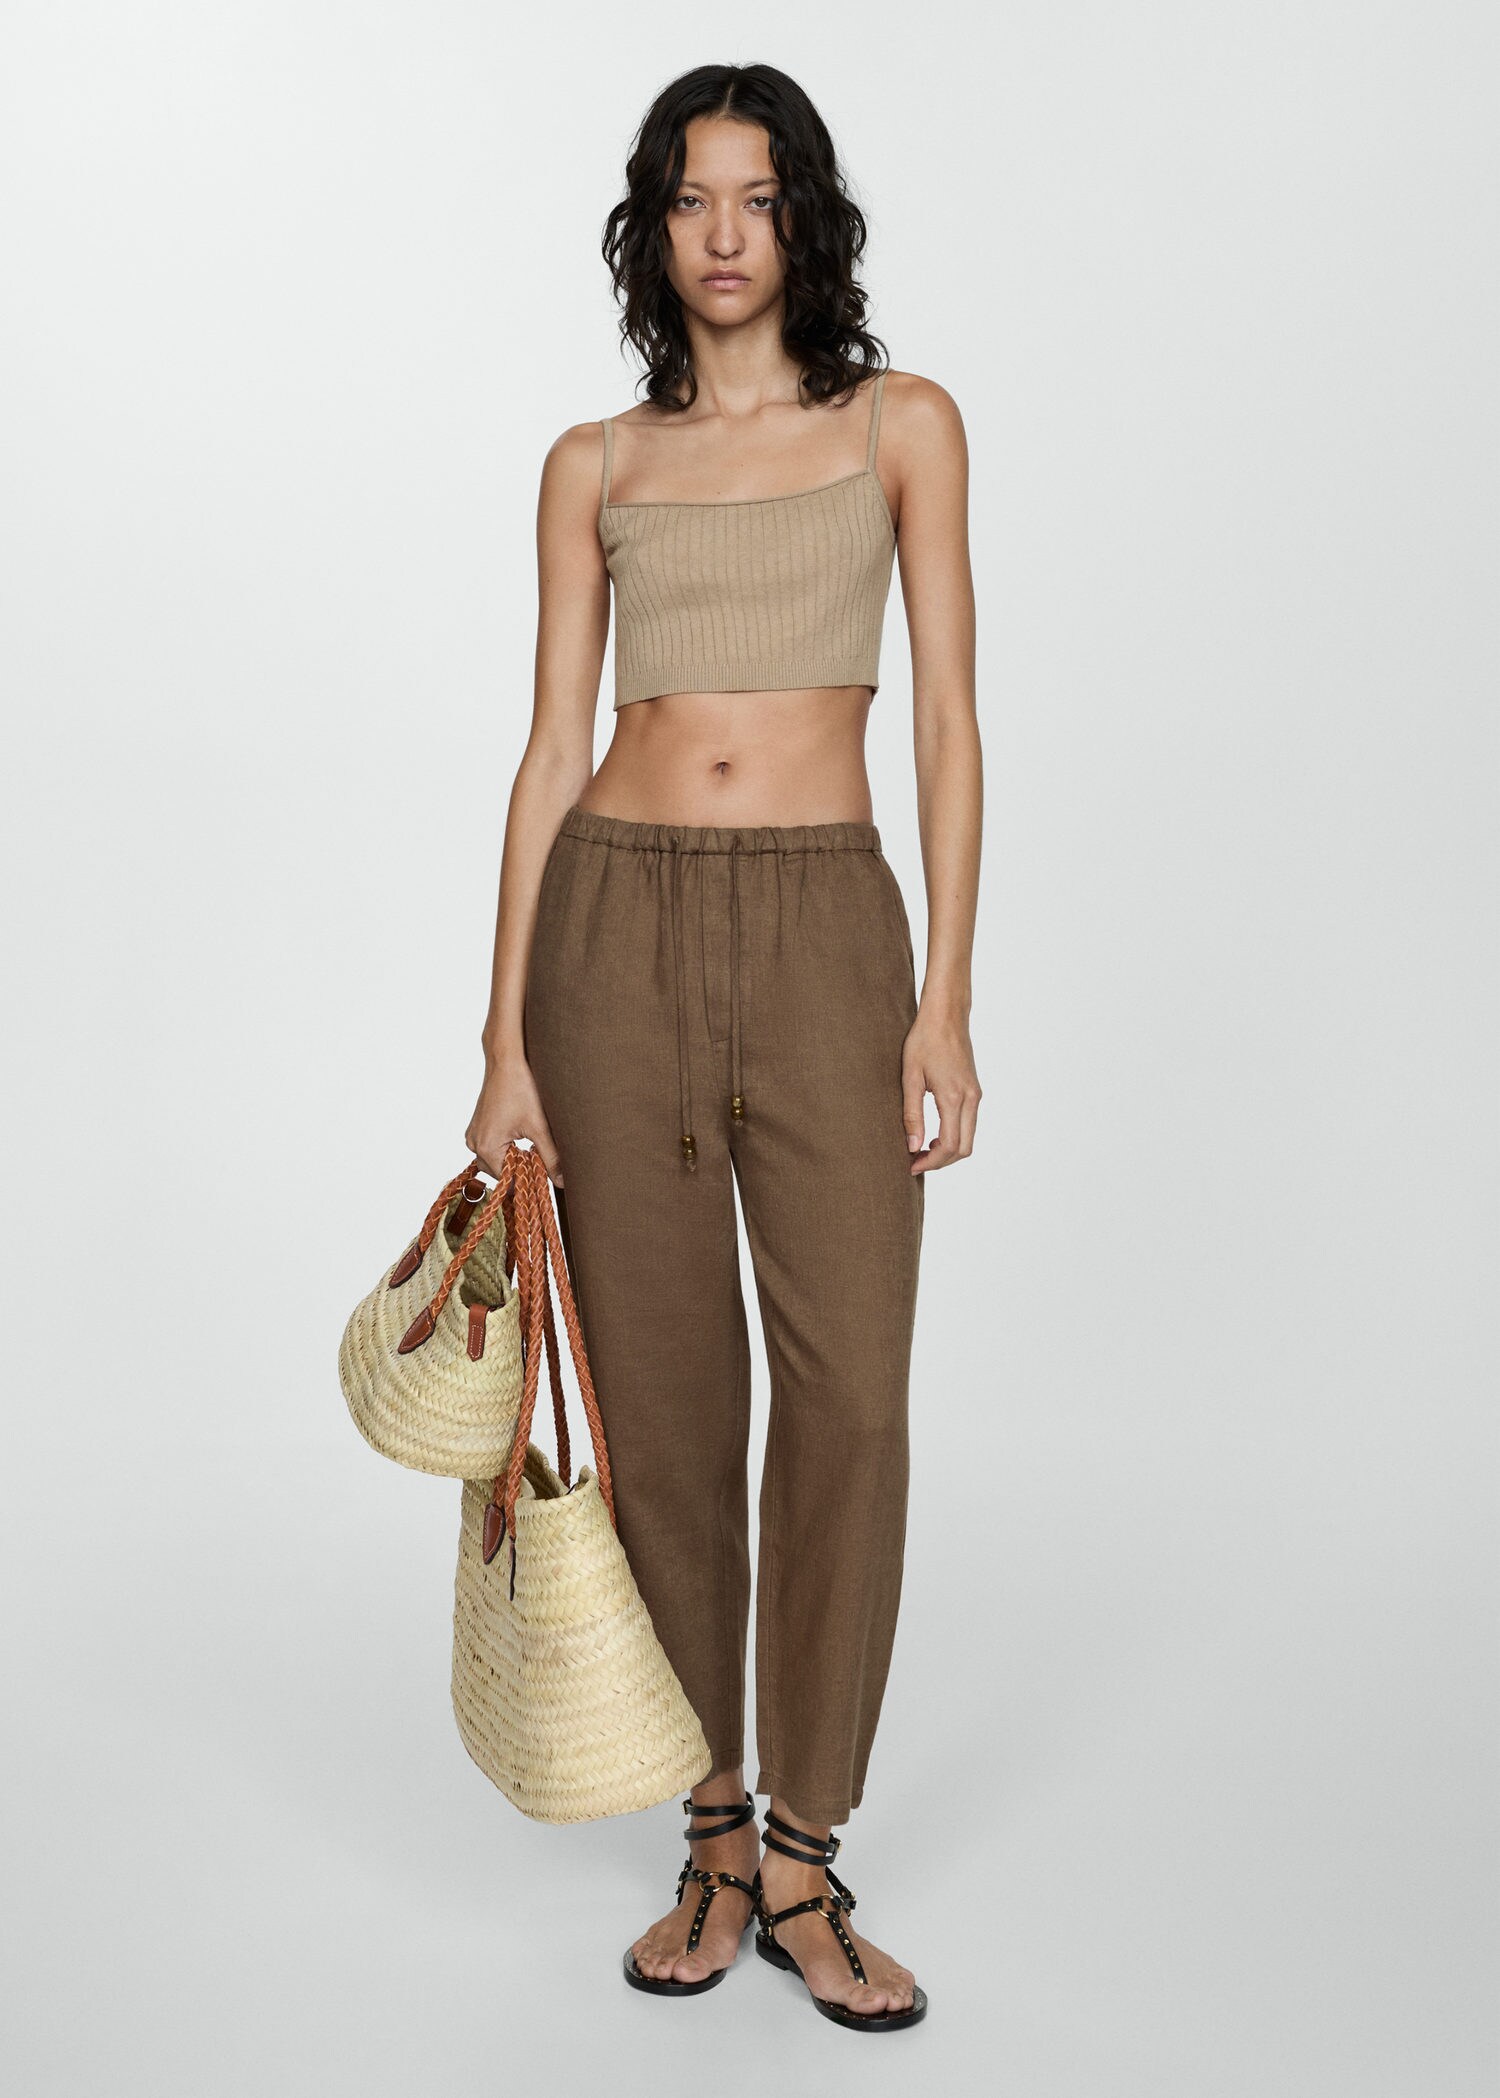 What to Wear With Brown Pants Female? [Updated May 2021]